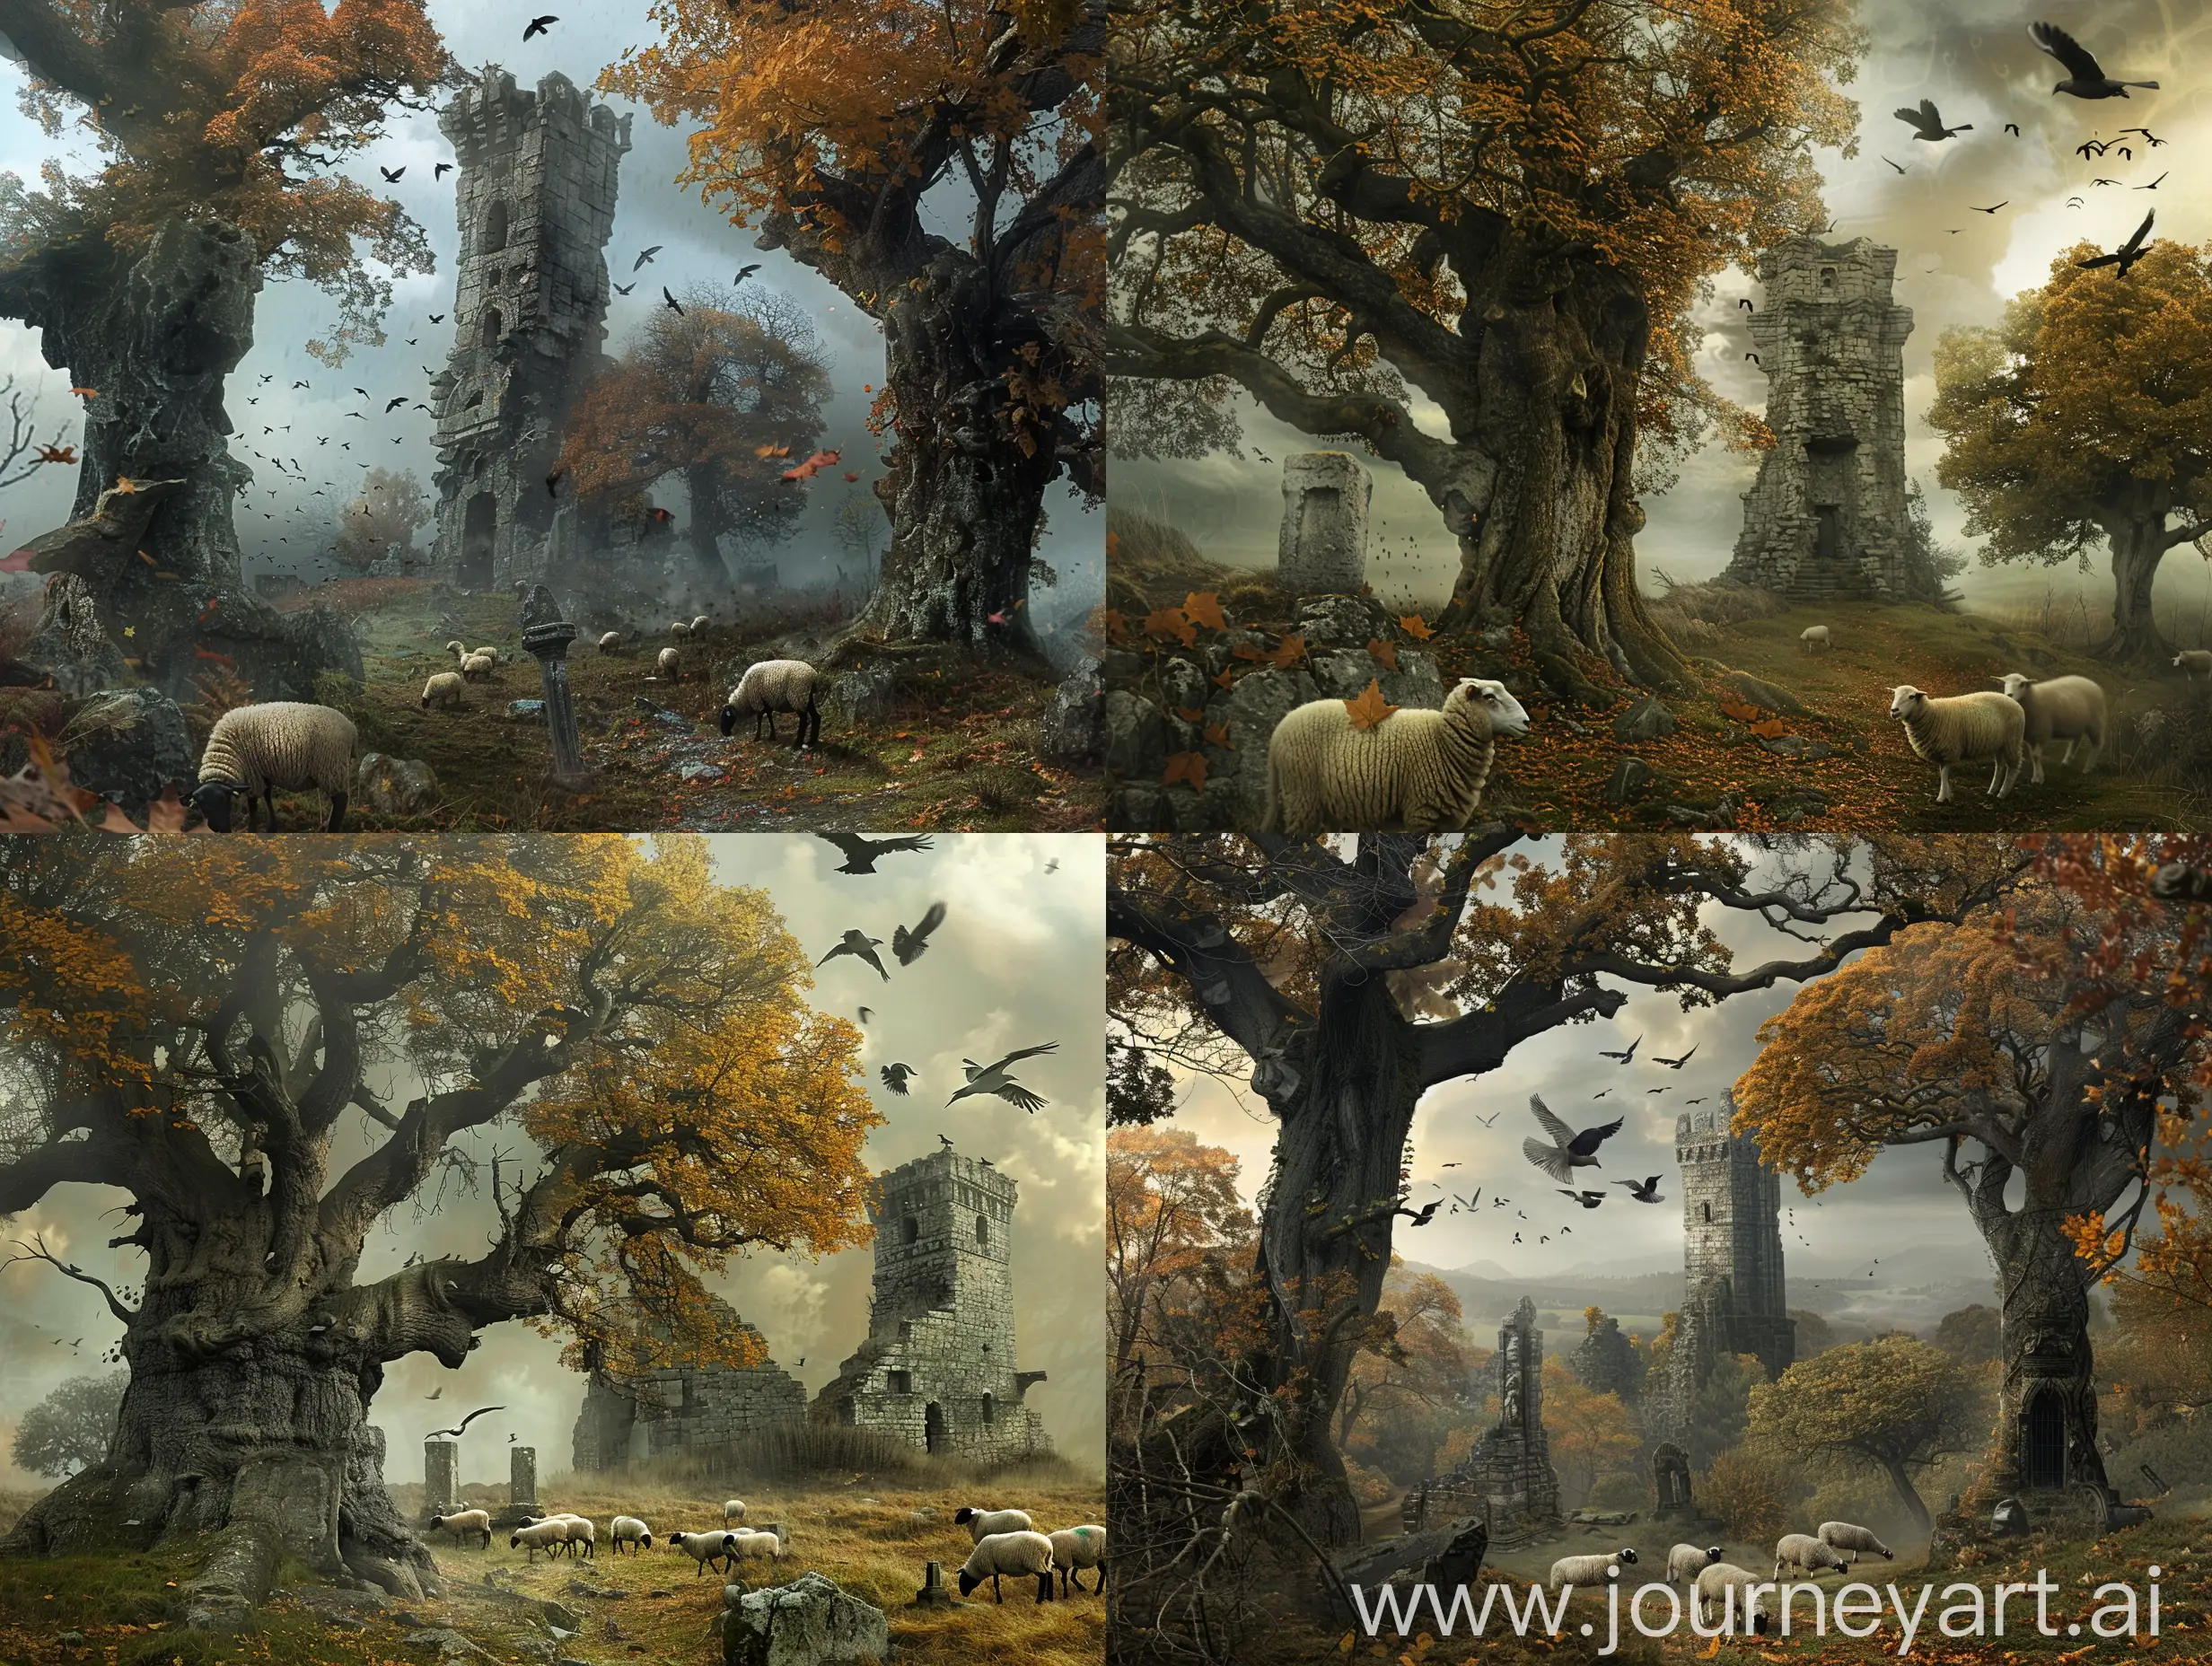 Enchanting-Autumn-Landscape-with-Ancient-Wizard-Tower-and-Magic-Stone-Shrine